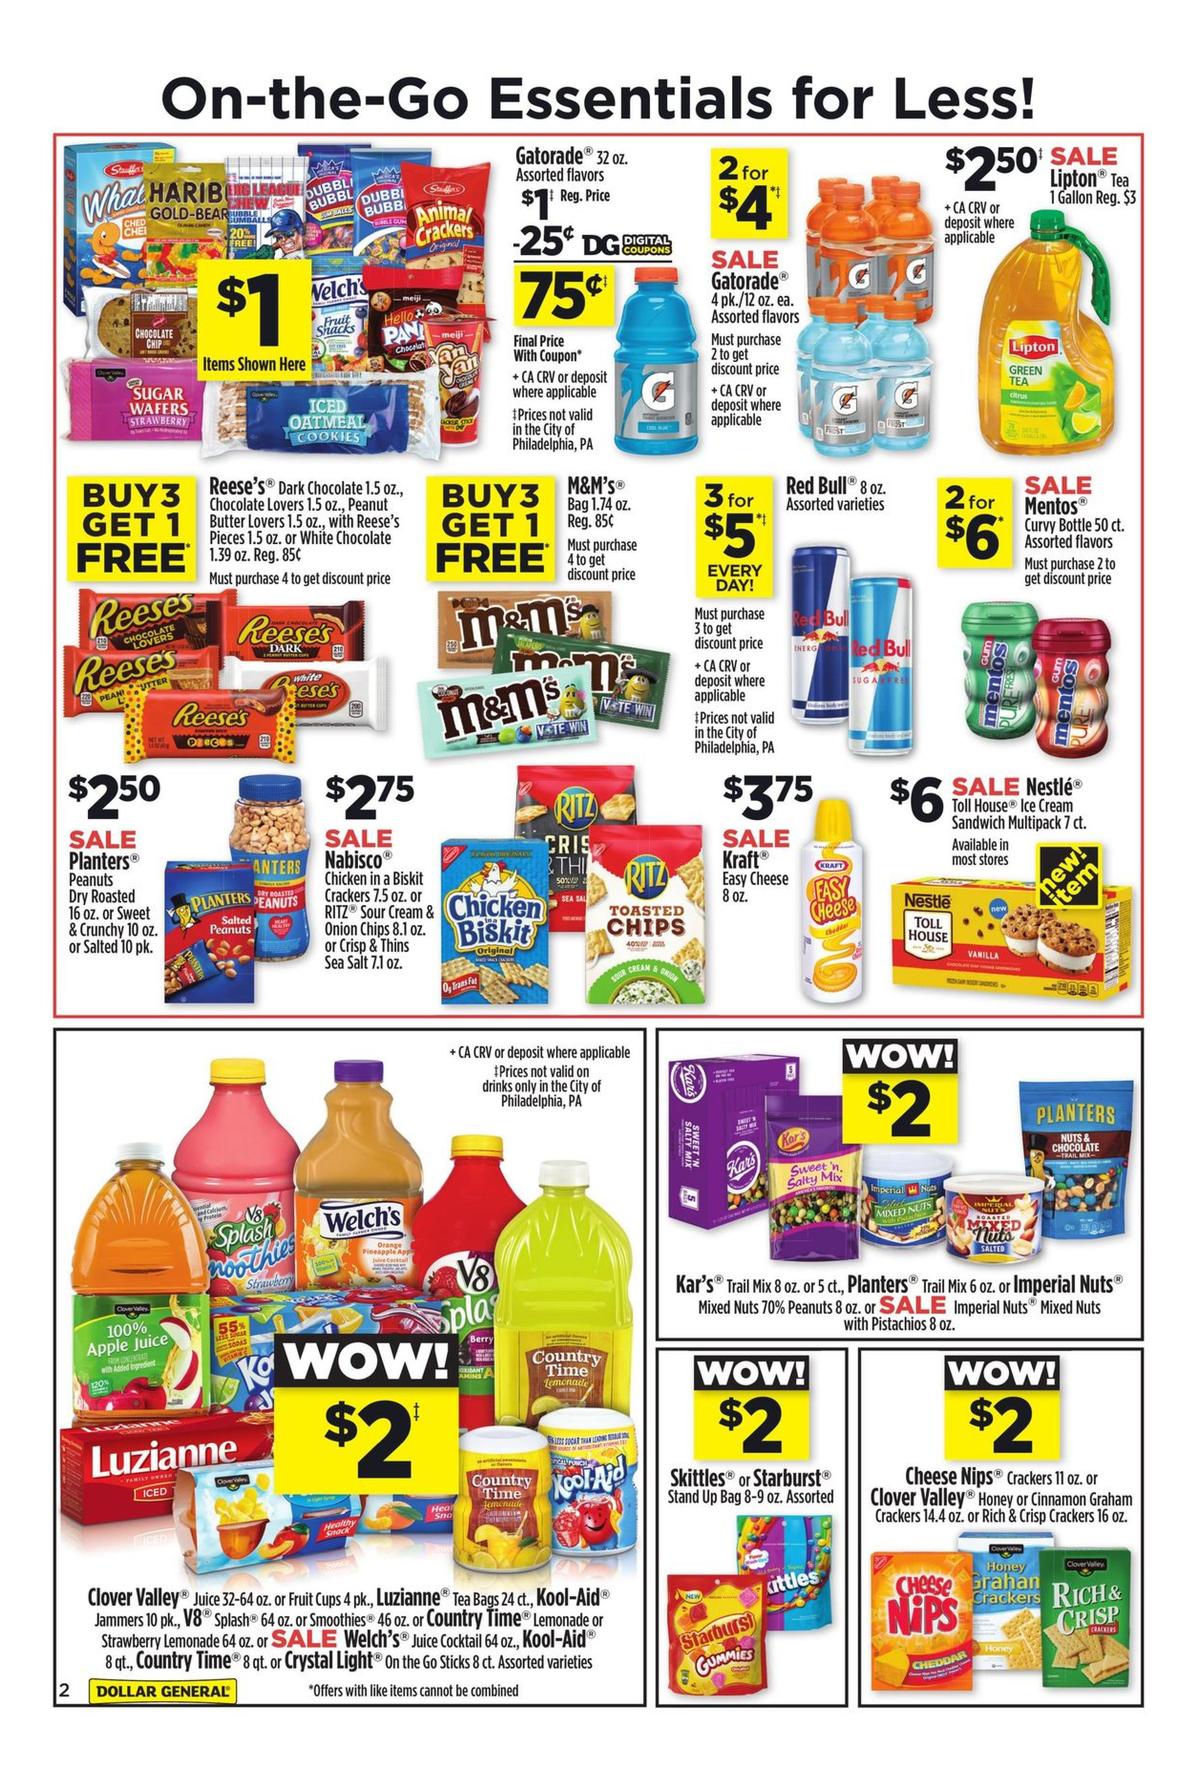 Dollar General Weekly Ads and Circulars for May 12 - Page 3